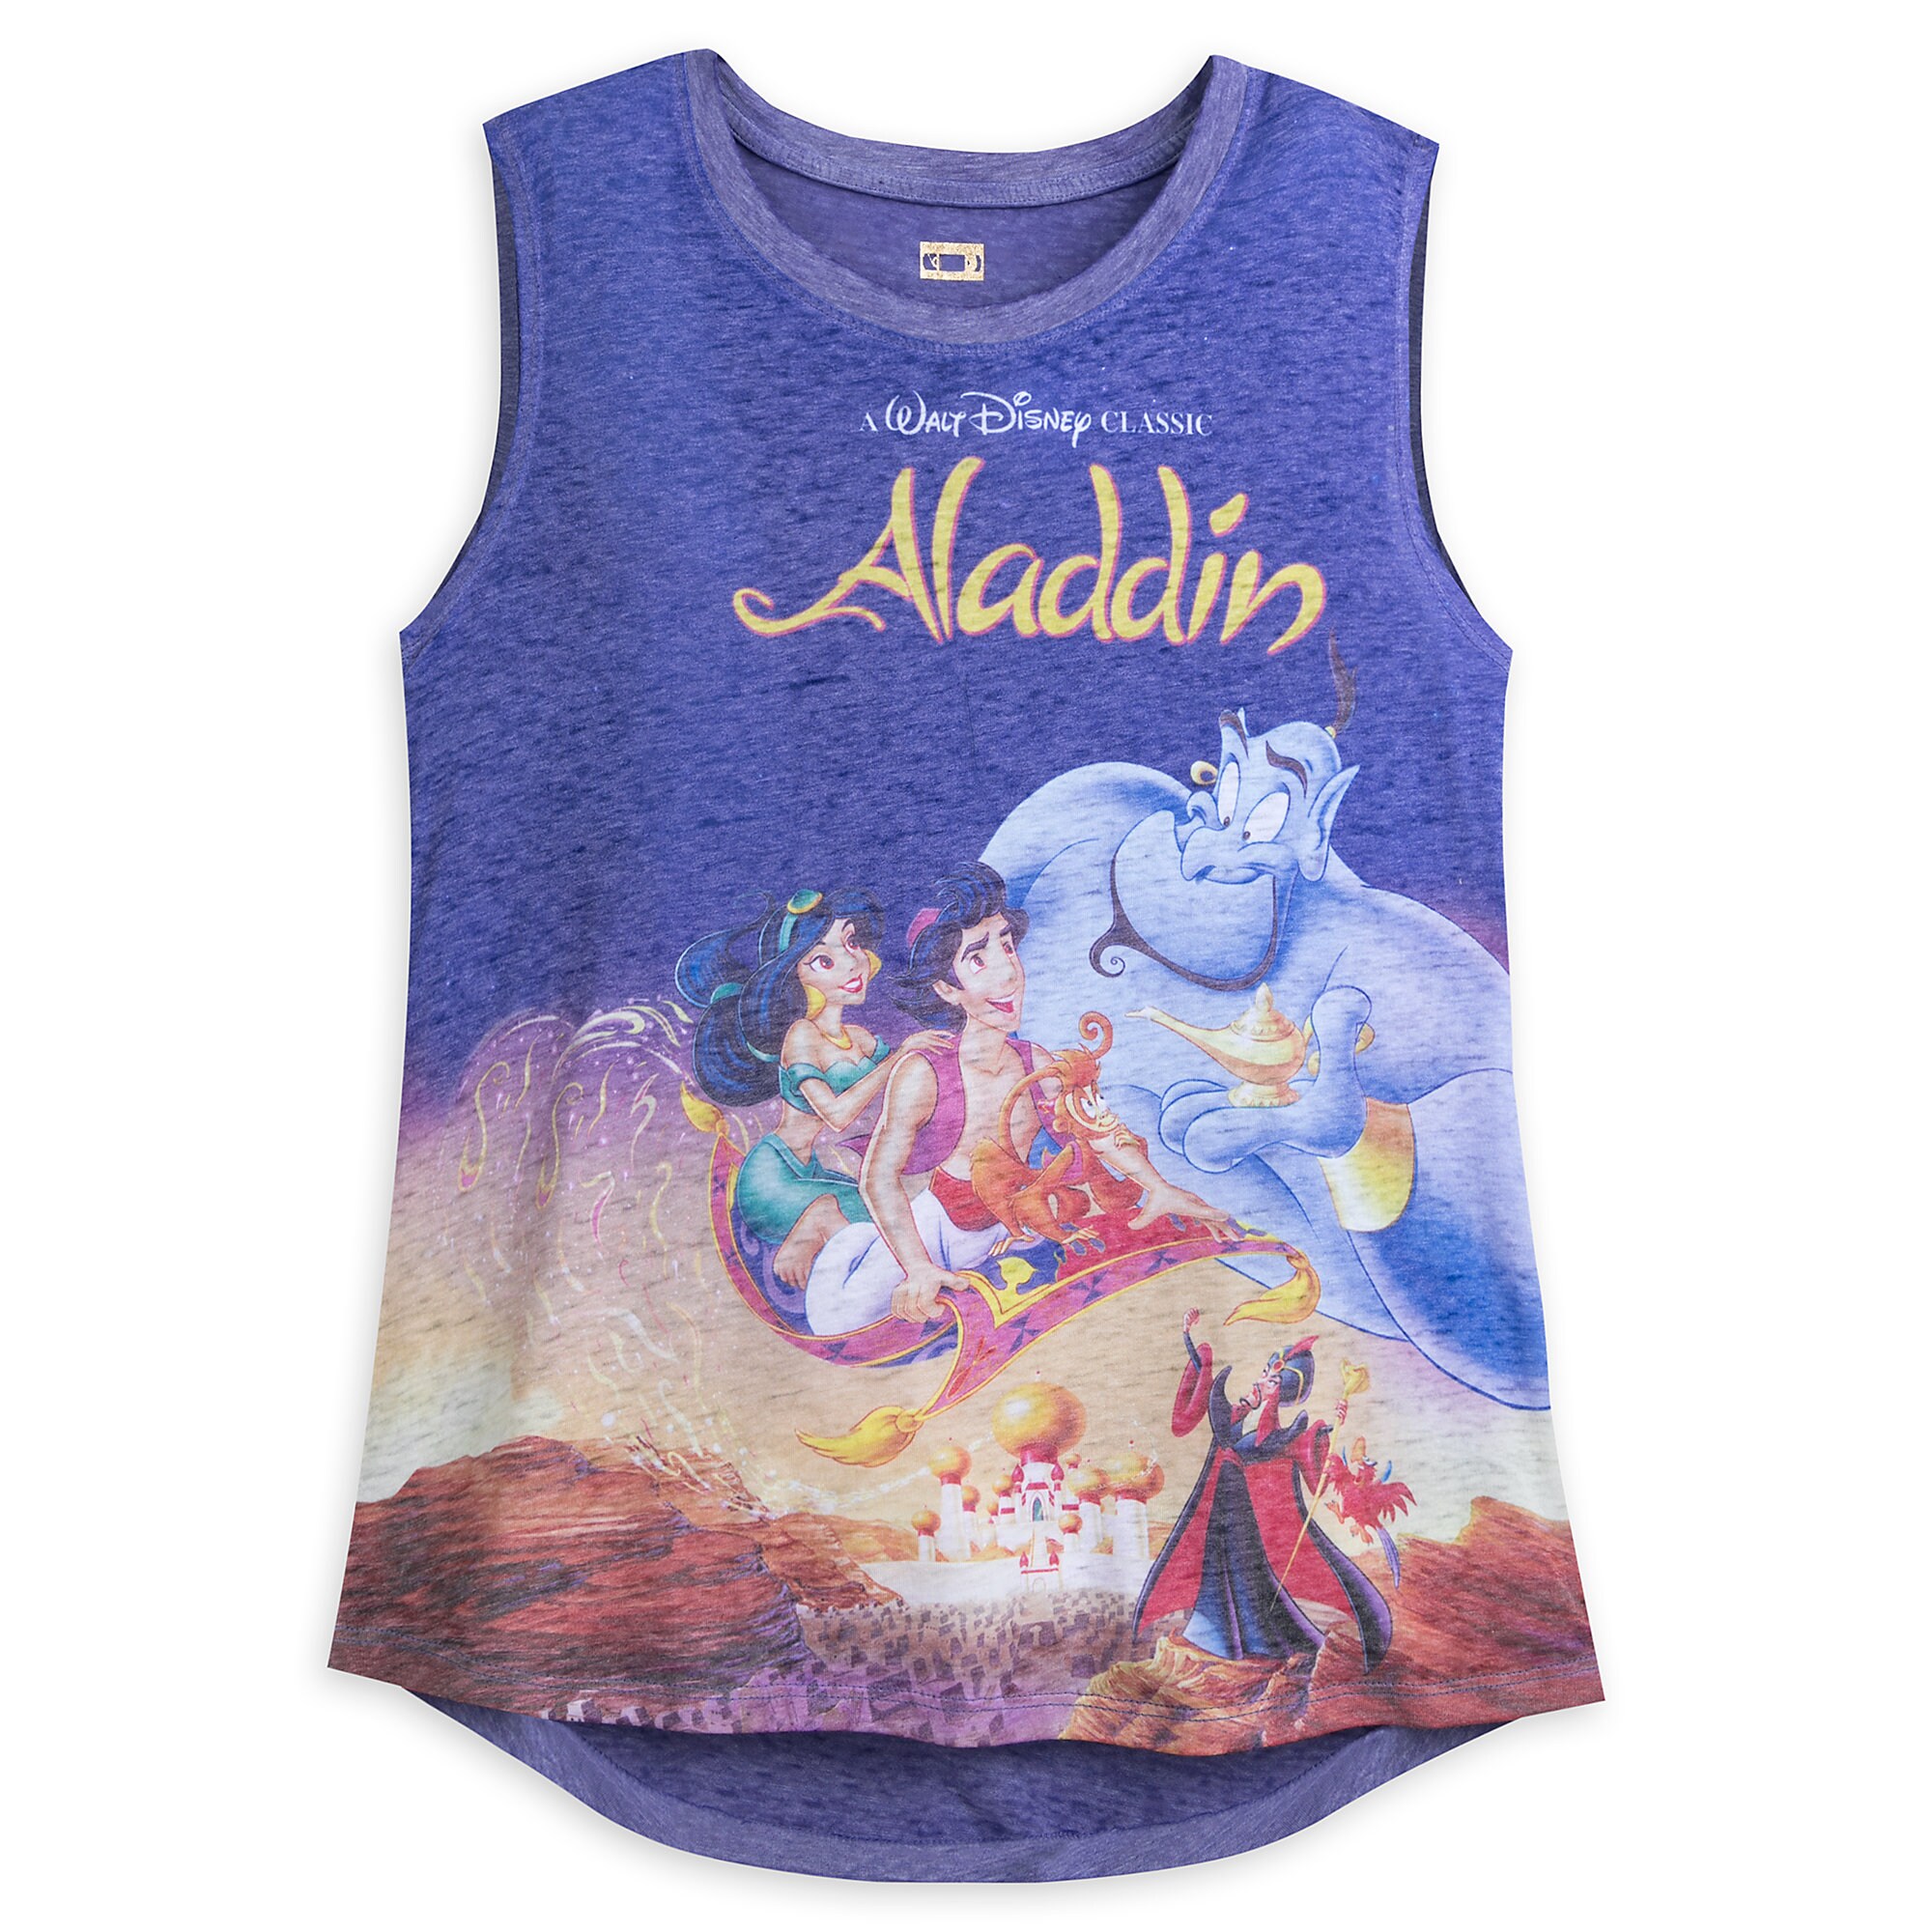 Aladdin VHS Cover Tank Top for Women